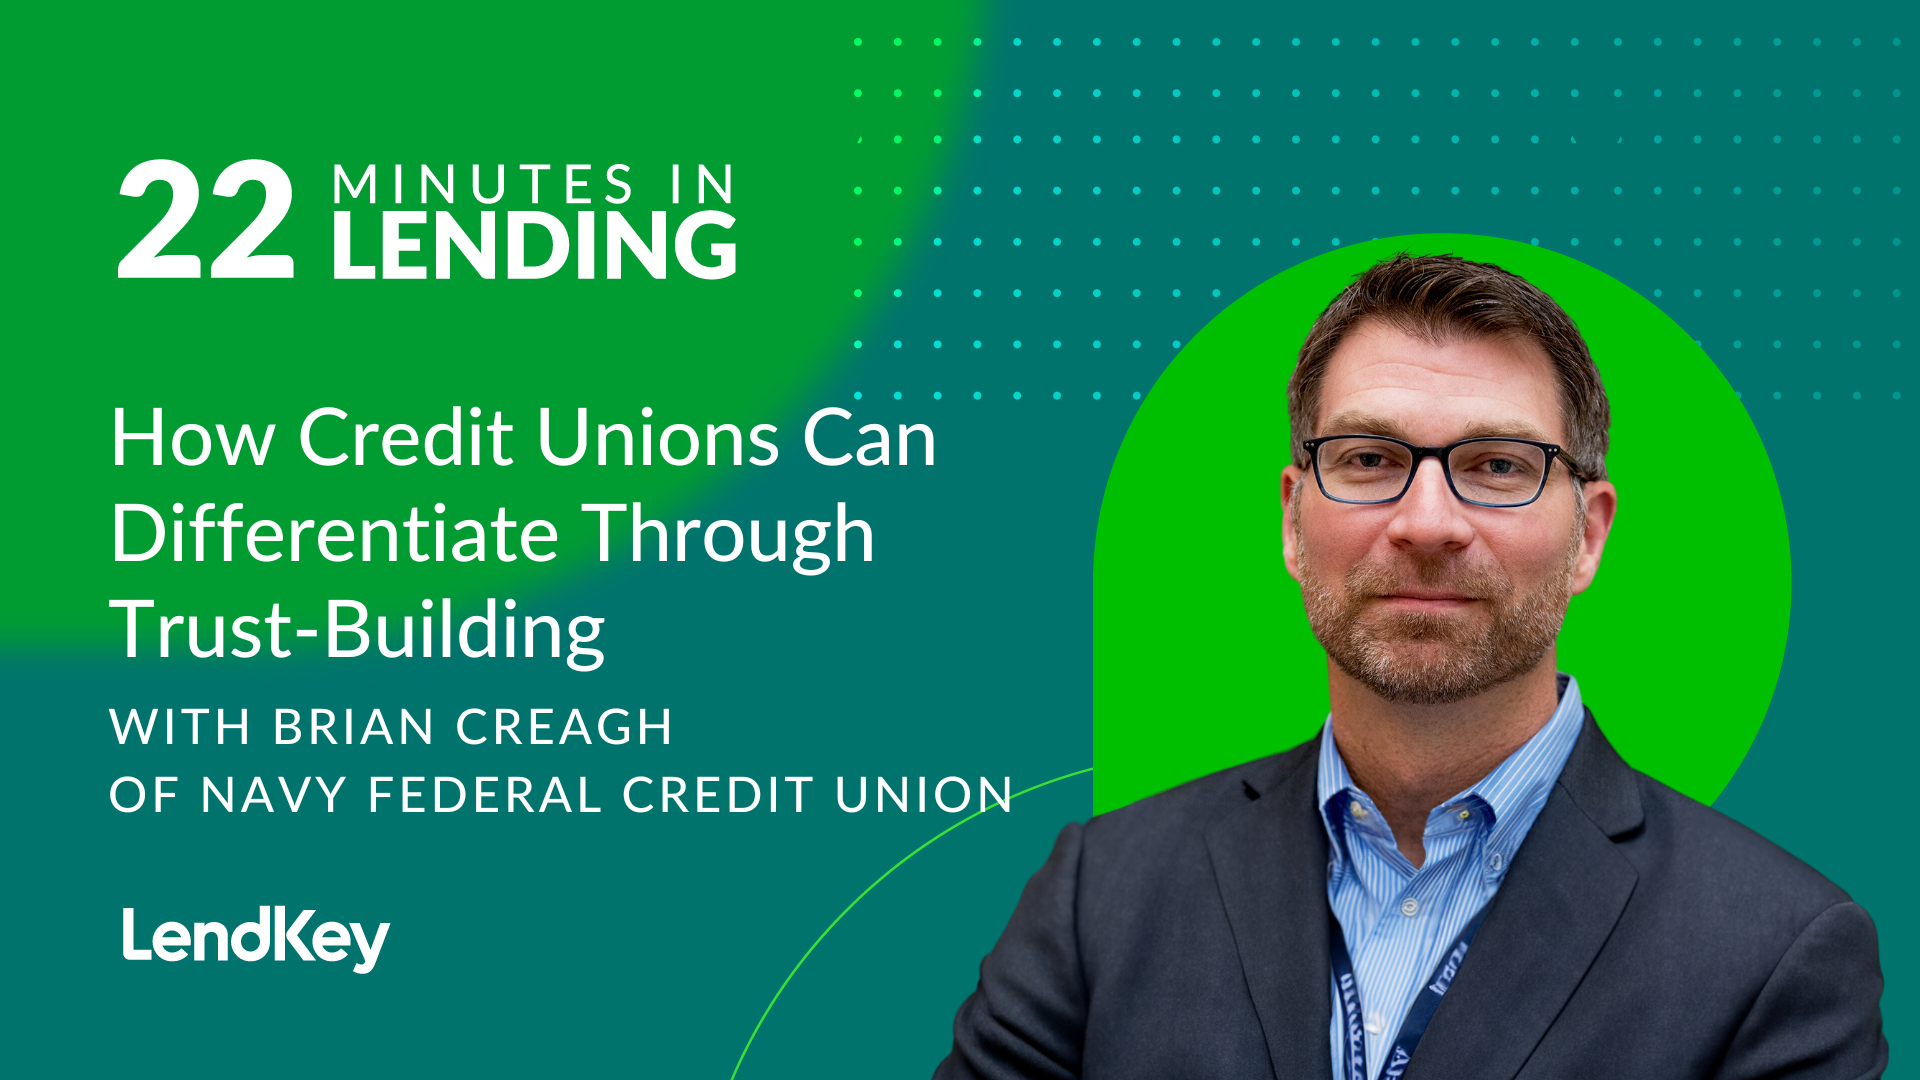 How Credit Unions Can Differentiate Through Trust-Building